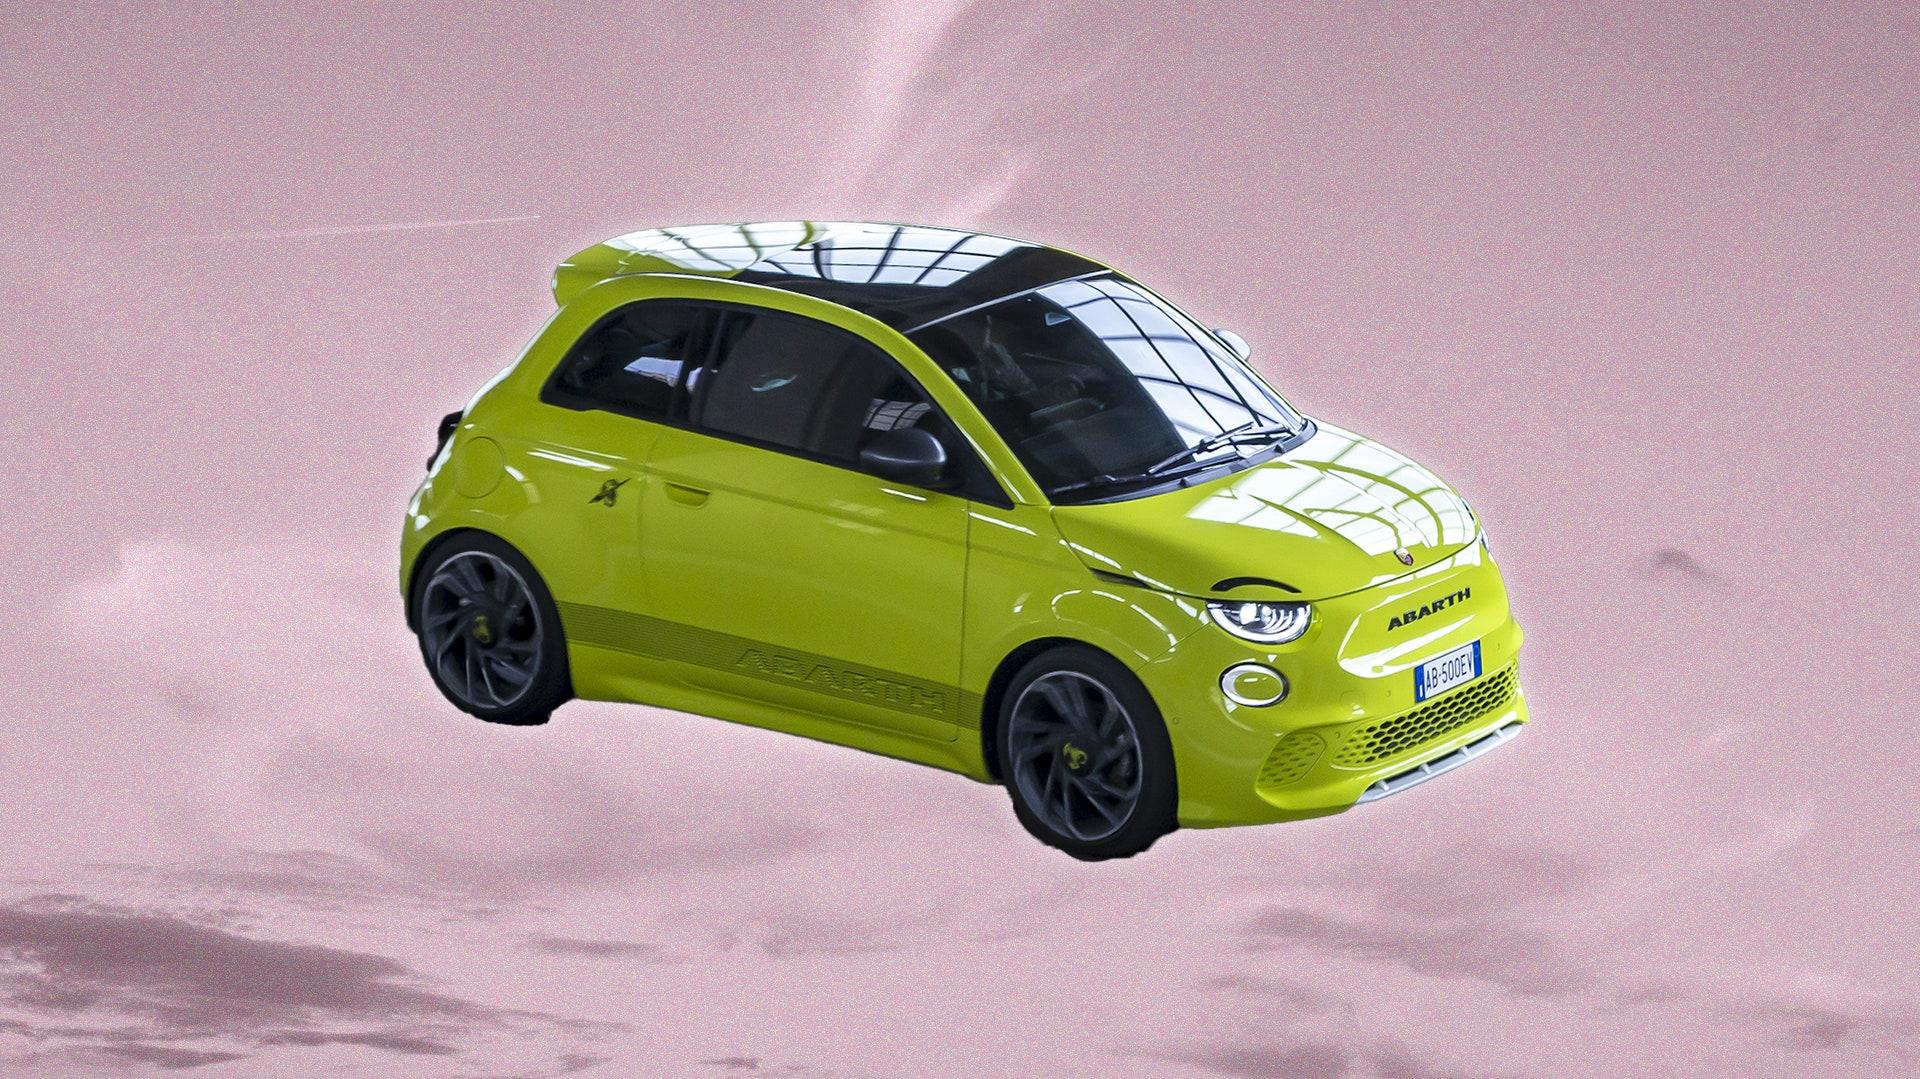 The New Electric Fiat Abarth Is A Racy Hot Hatch City Car Of